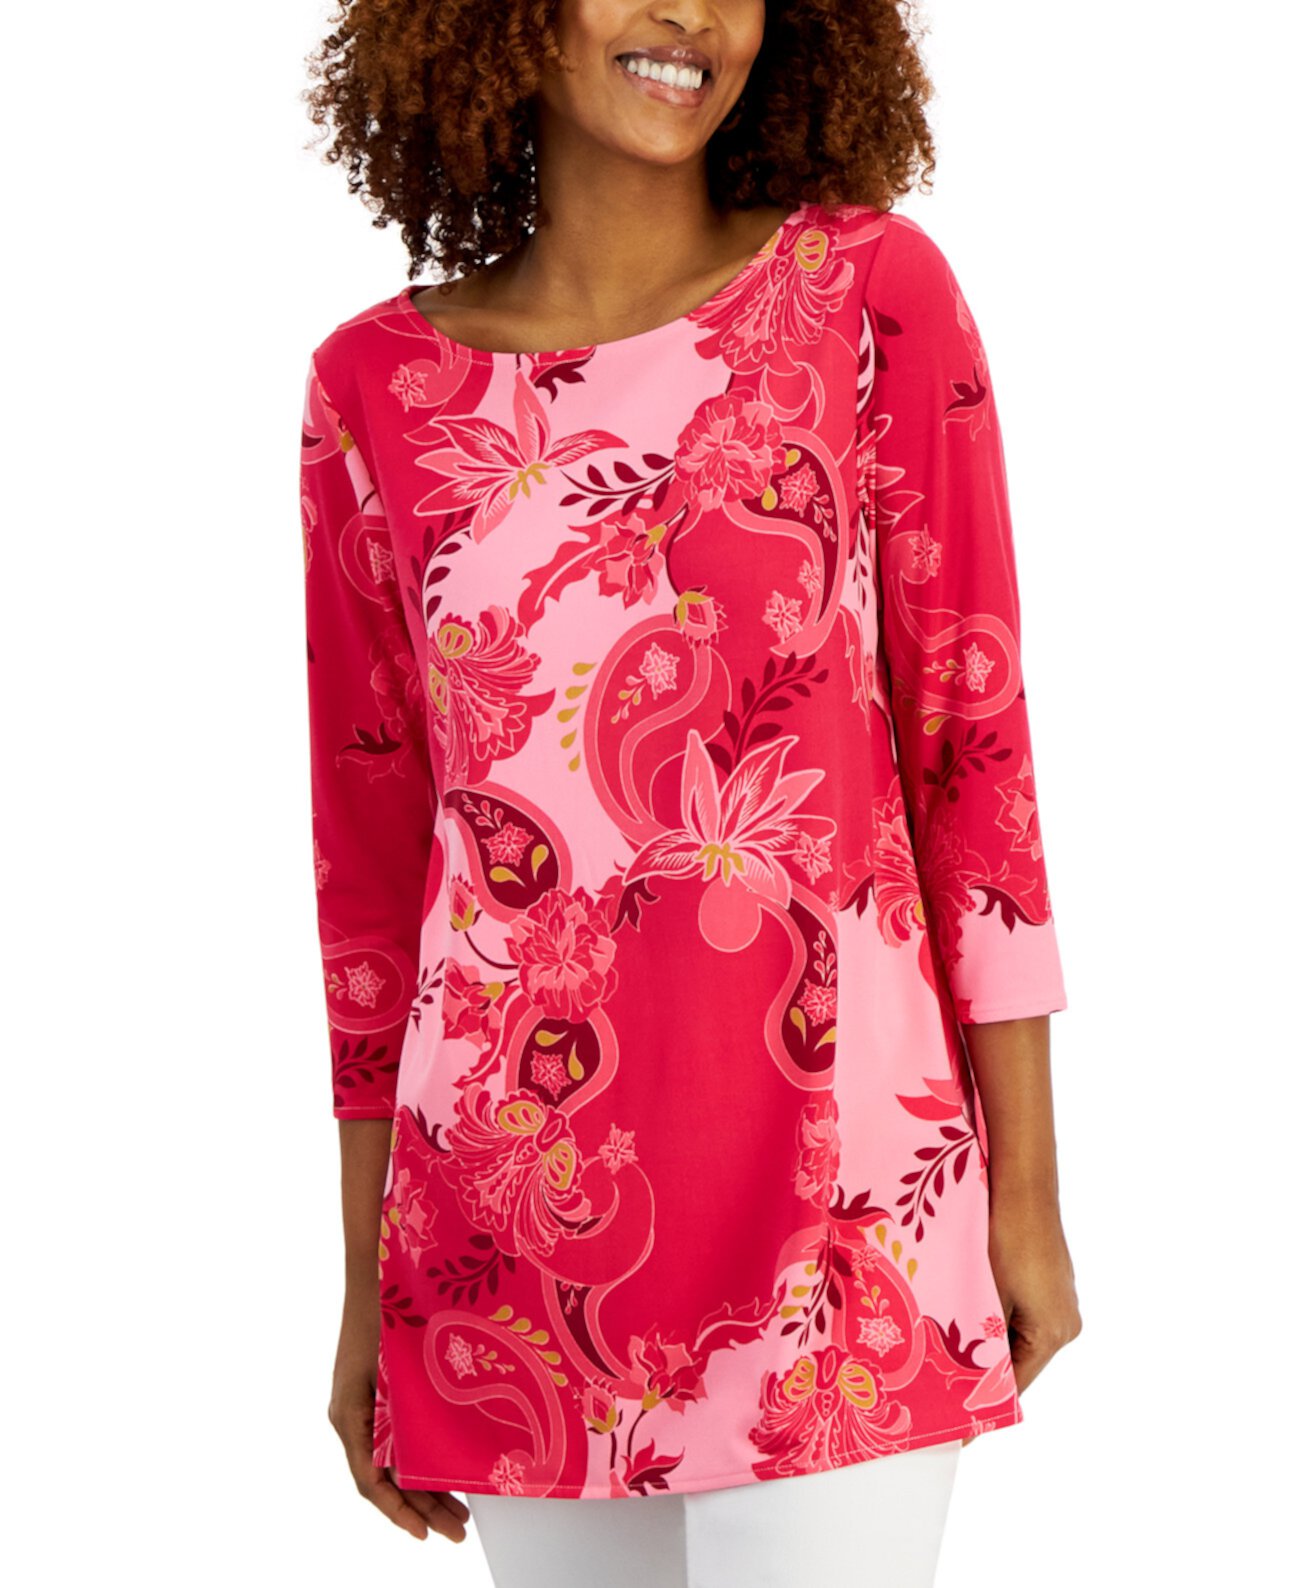 Petite Glamorous Garden 3/4-Sleeve Boat-Neck Top, Created for Macy's J&M Collection